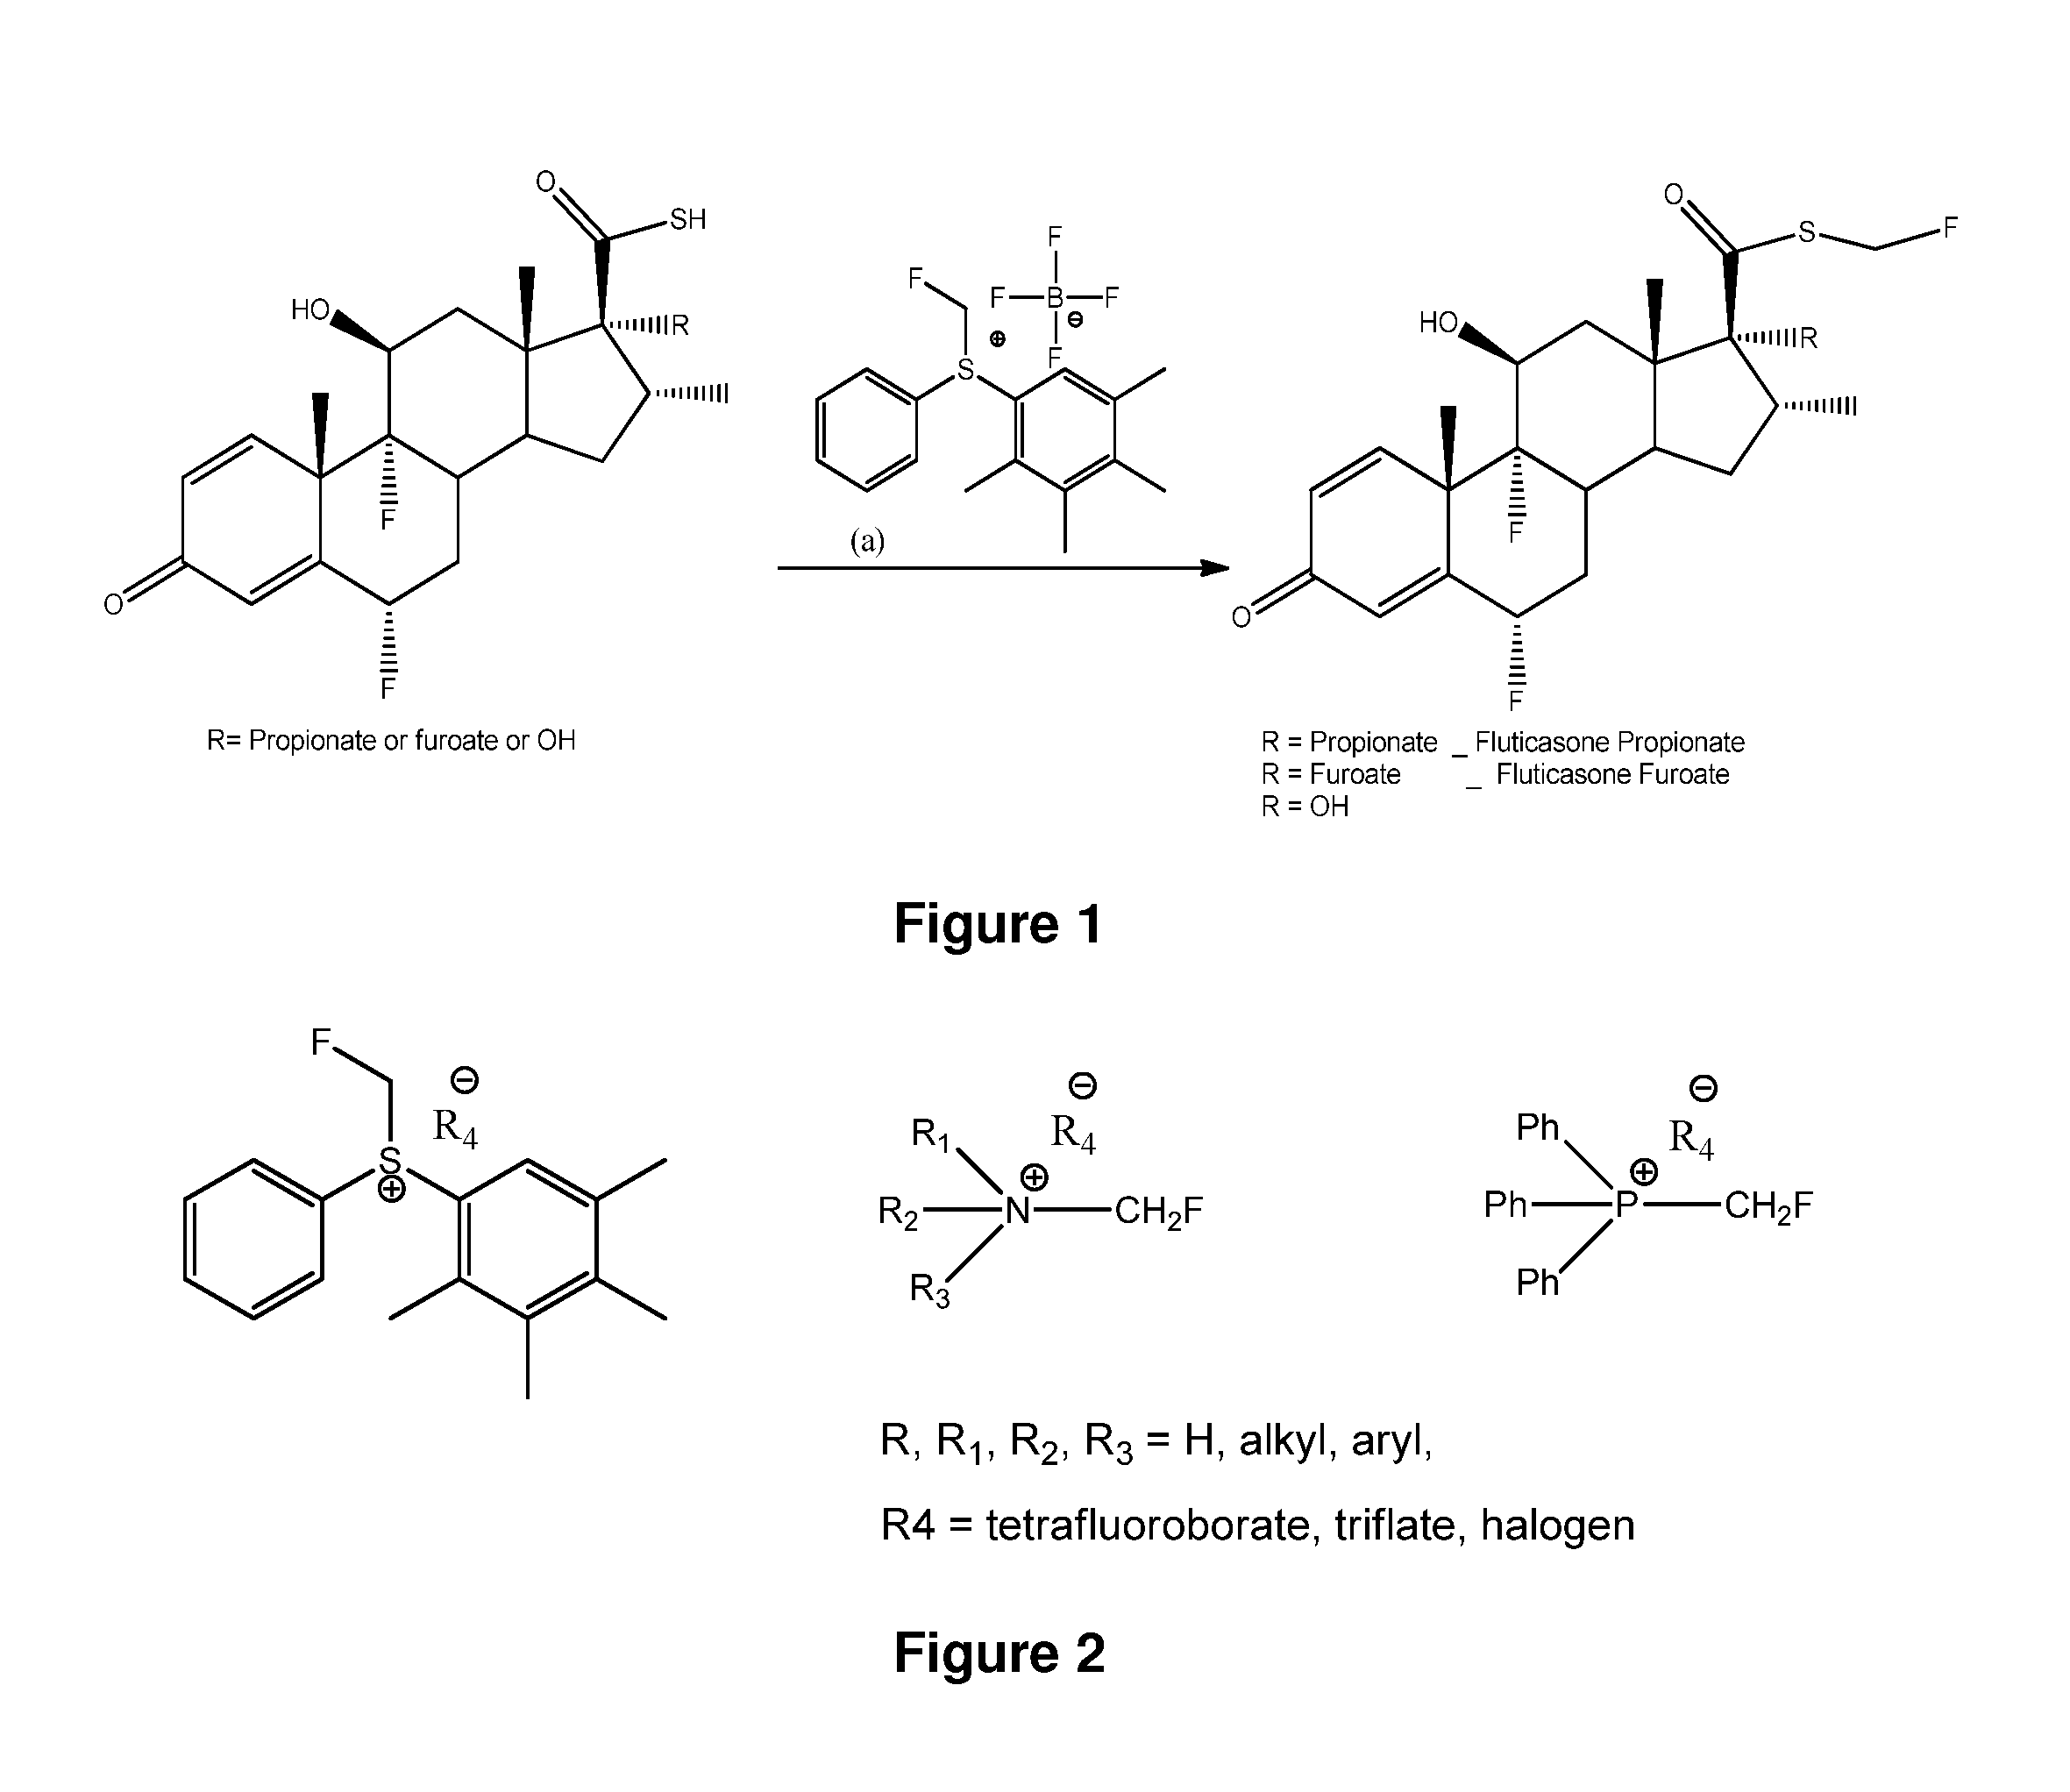 Method for Monofluoromethylation of Organic Substrates to Prepare Biologically Active Organic Compounds